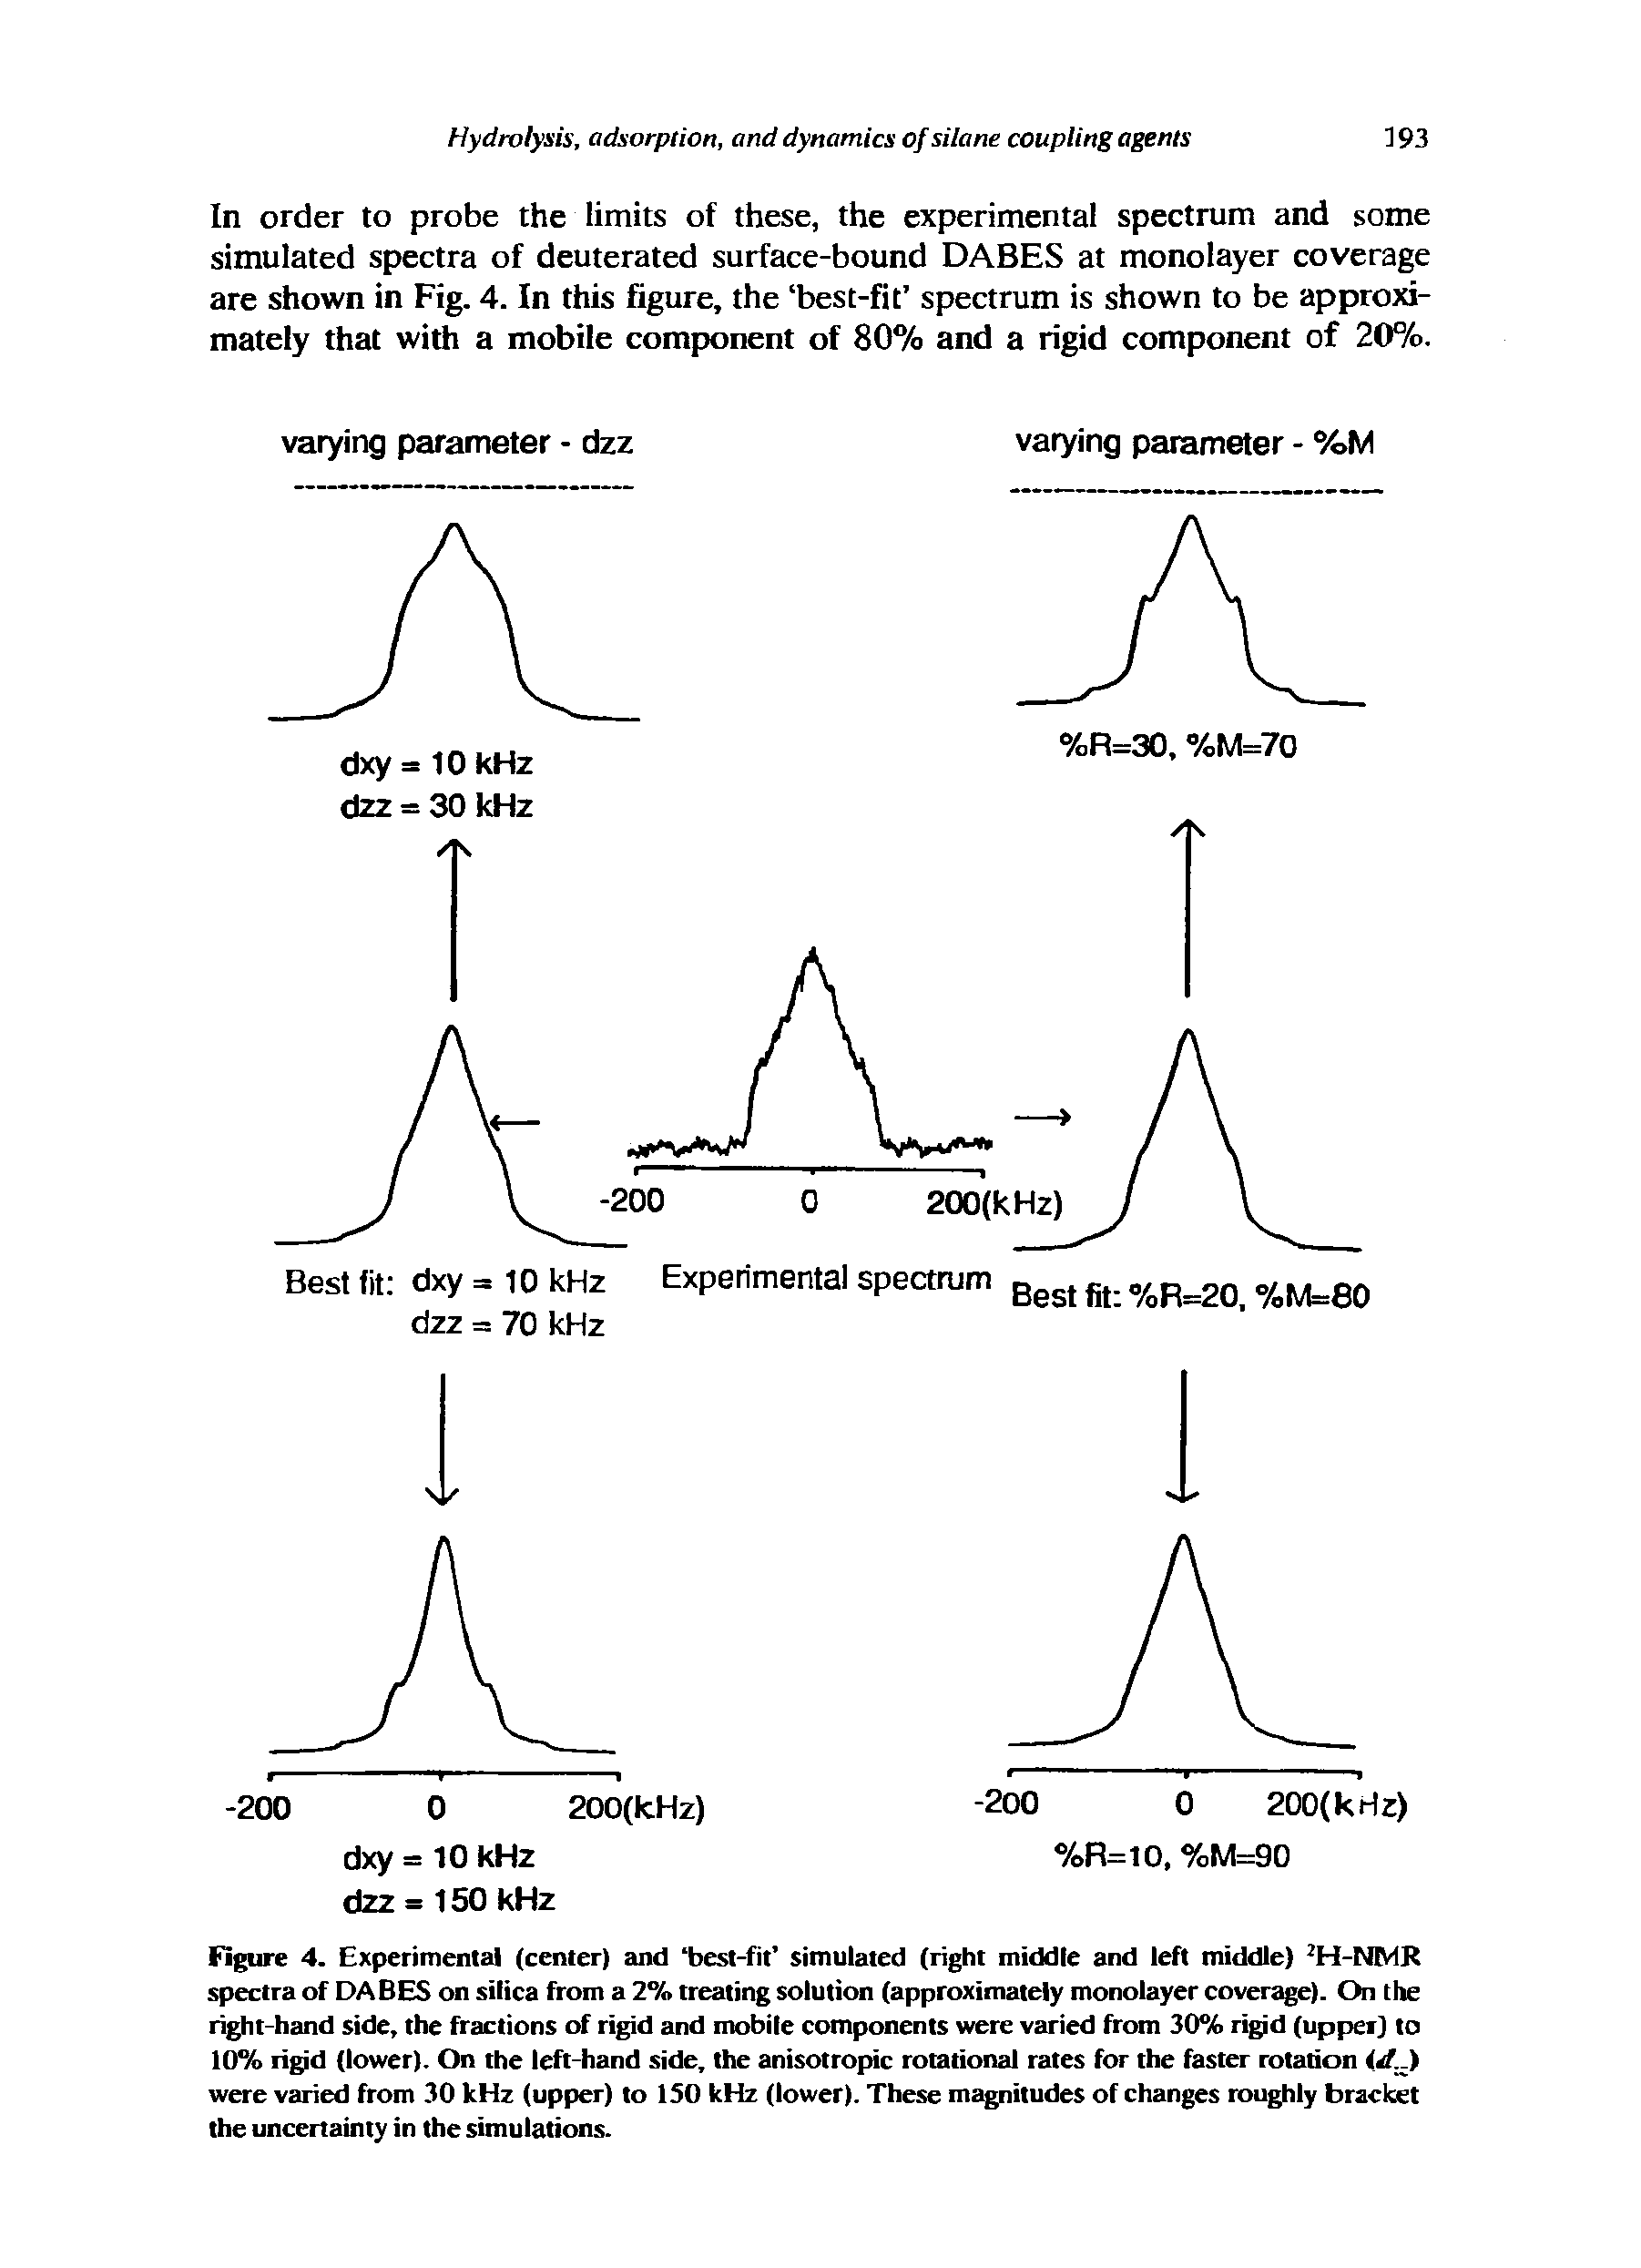 Figure 4. Experimental (center) and best-fit simulated (right middle and left middle) H-NMR spectra of DABES on silica from a 2% treating solution (approximately monolayer coverage). On the right-hand side, the fractions of rigid and mobile components were varied from 30% rigid (upper) to 10% rigid (lower). On the left-hand side, the anisotropic rotational rates for the faster rotation <rf ) were varied from 30 kHz (upper) to 150 kHz (lower). These magnitudes of changes roughly bracket the uncertainty in the simulations.